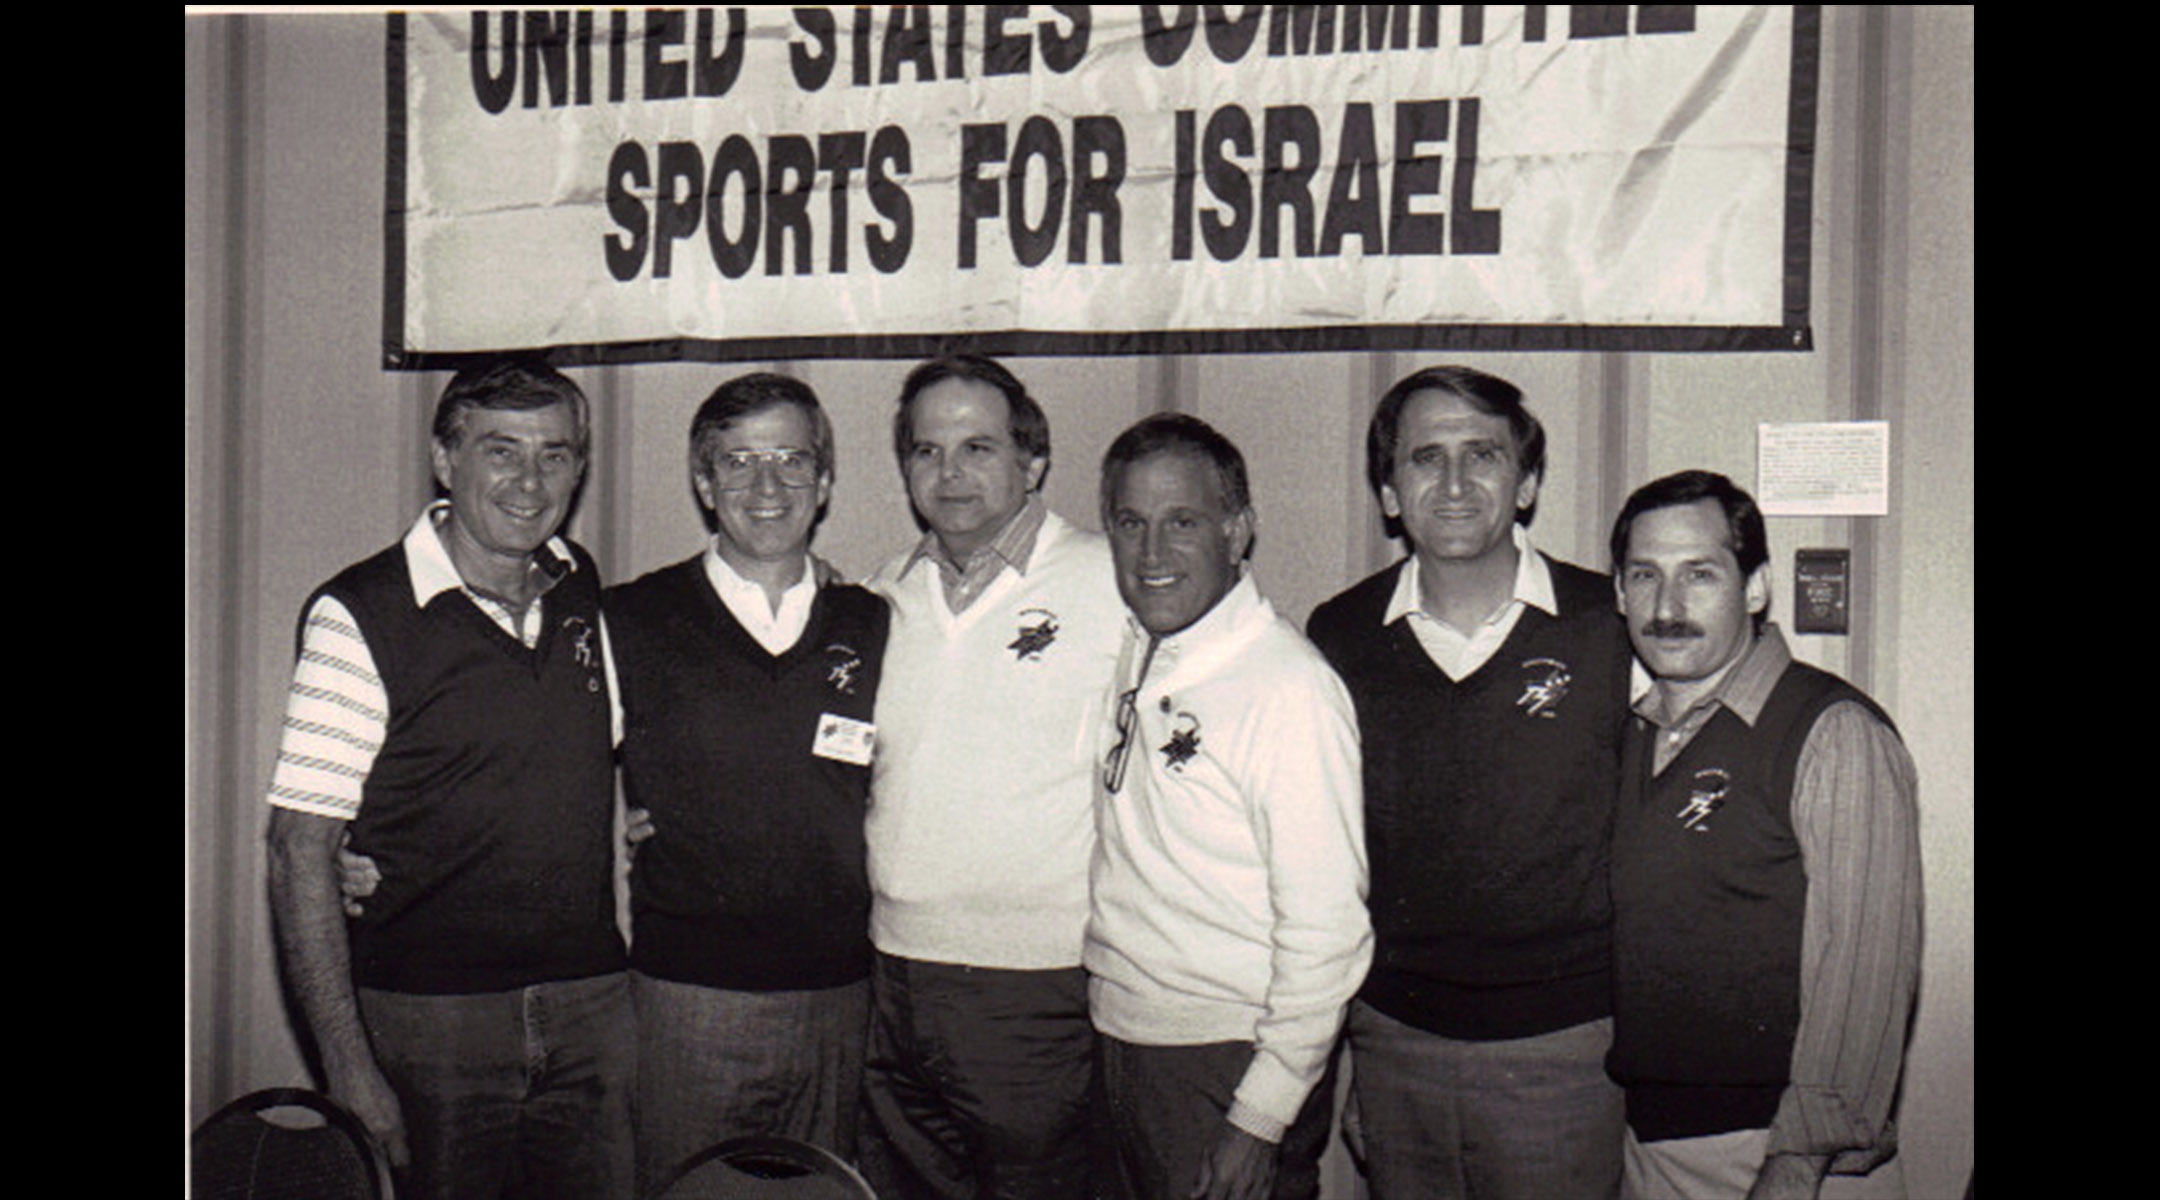 Alan Sherman, second from right, at a gathering of the United States Committee Sports for Israel. (Courtesy of Maccabi USA)